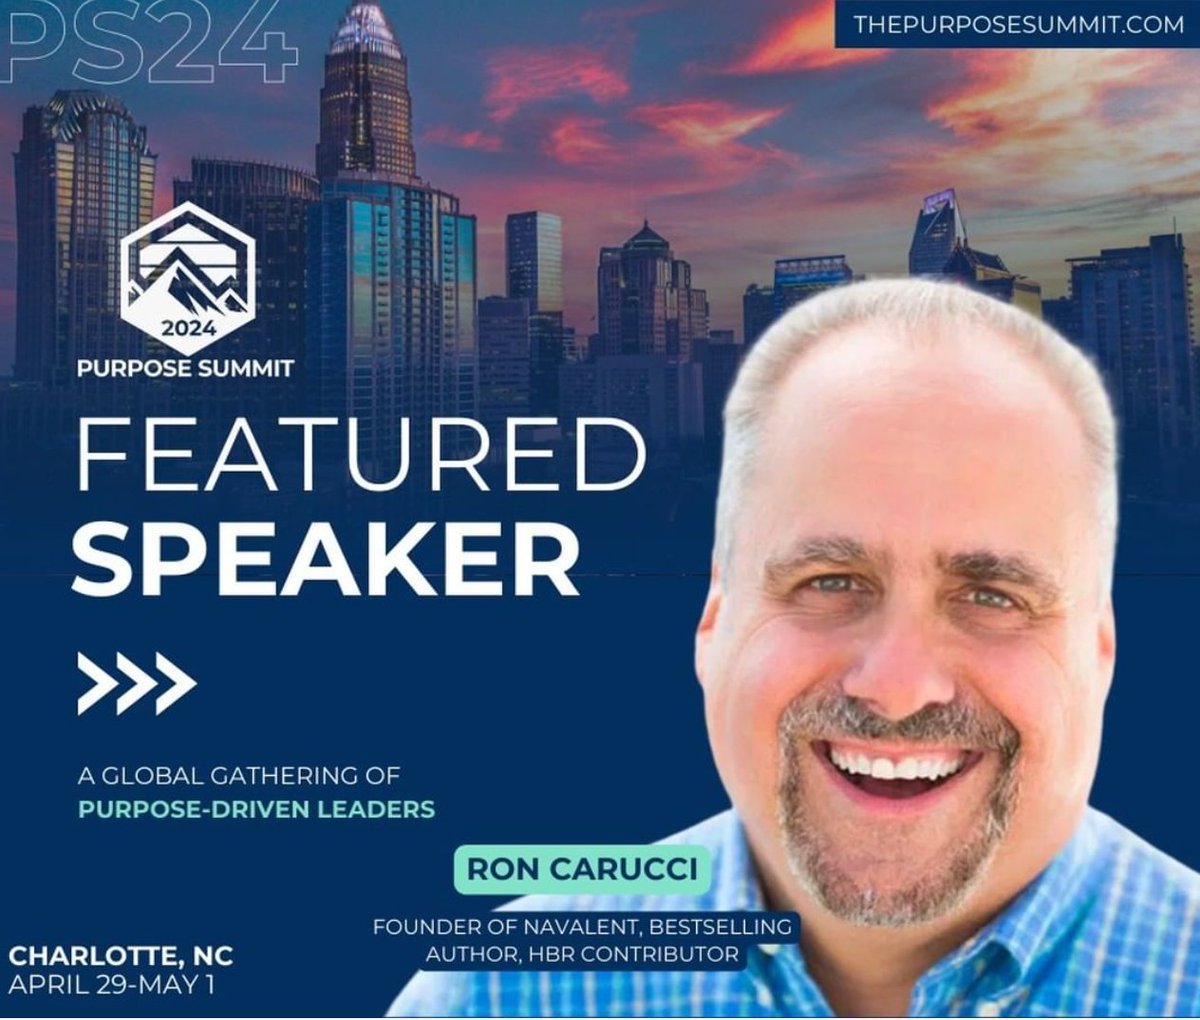 Only a few weeks until The Purpose Summit 2024 in Charlotte, NC! Don't miss the chance to learn from fellow purpose-driven leaders and build better relationships, leaders, and organizations together. zurl.co/r2EU #PurposeSummit #BetterTogether